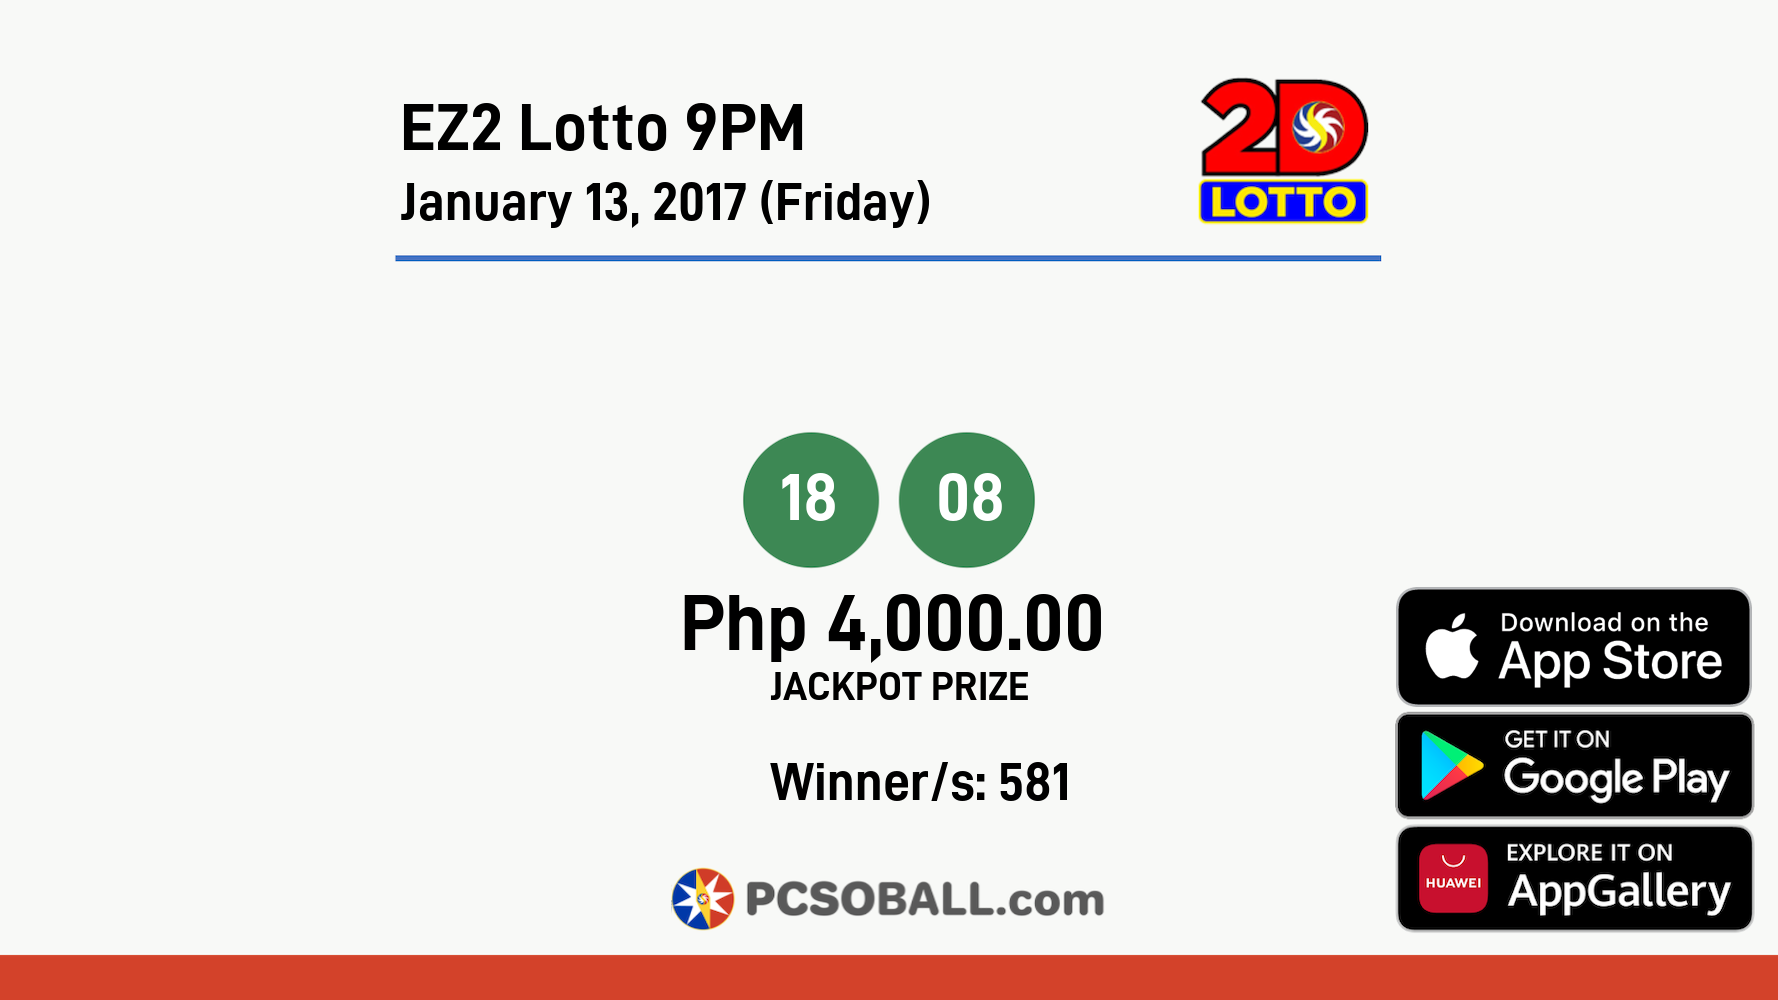 EZ2 Lotto 9PM January 13, 2017 (Friday) Result